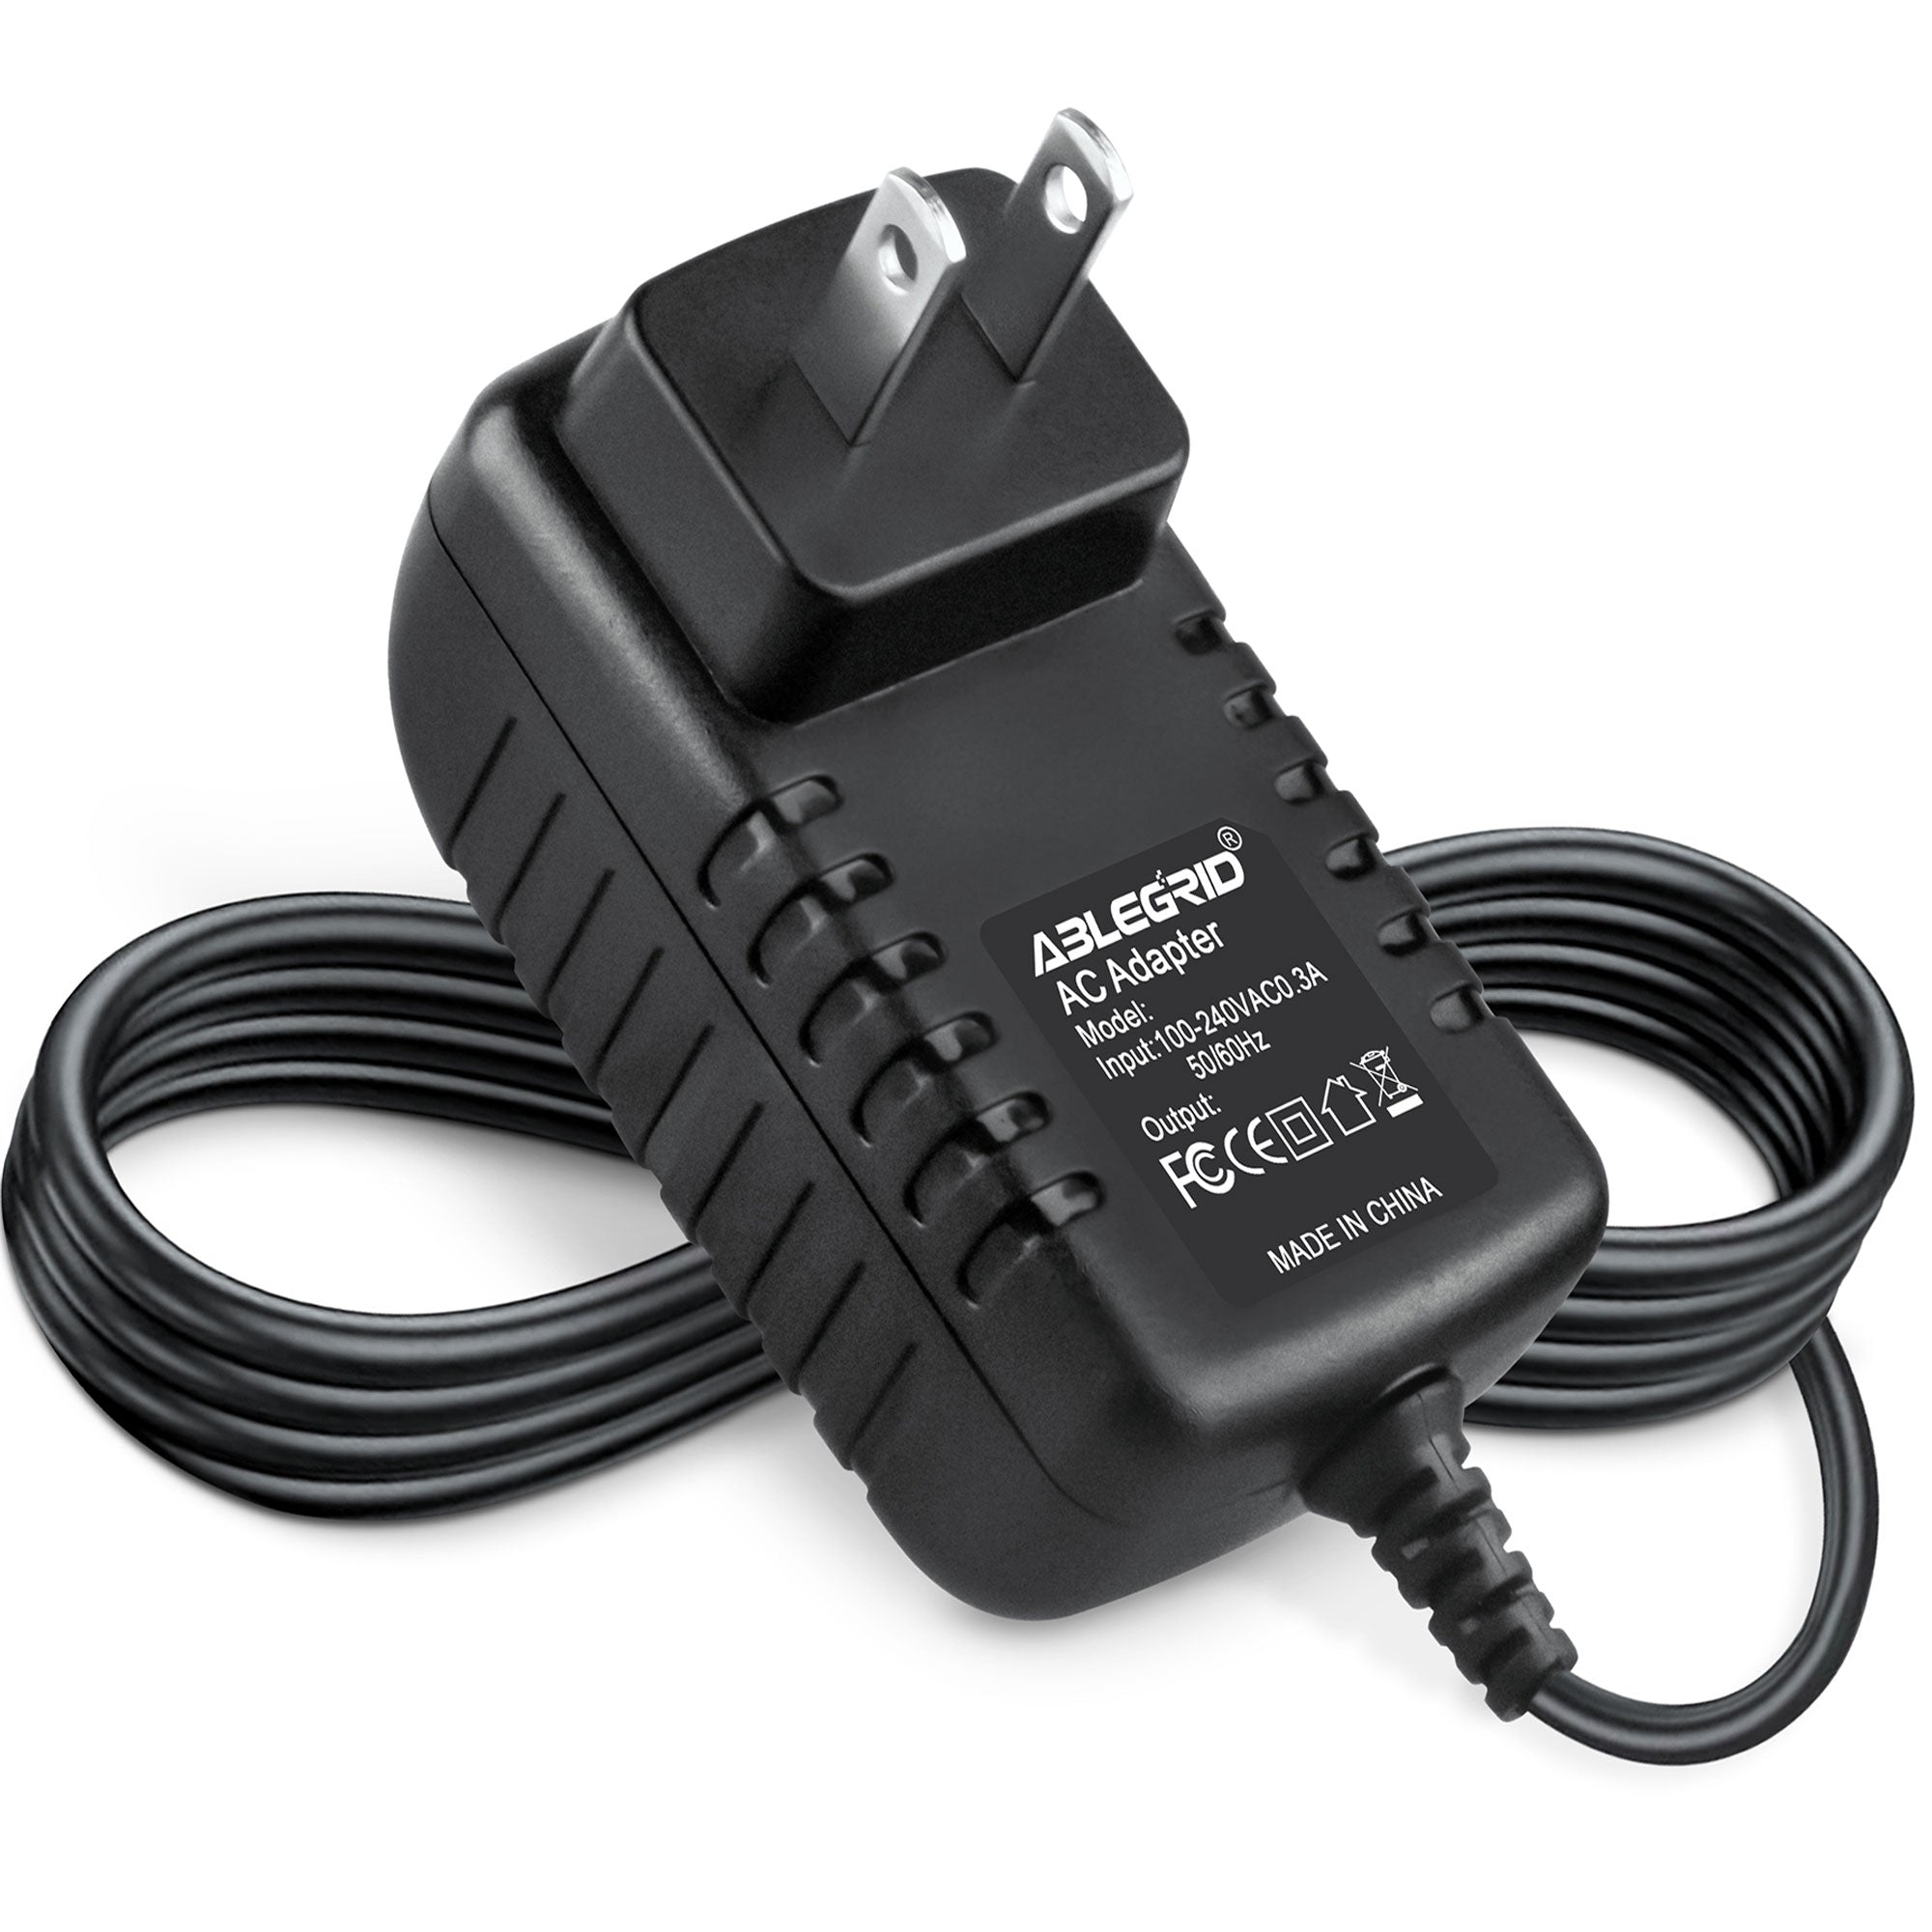 AbleGrid AC-DC Adapter for TERAYON TEAD-48-101200U P/N:9200007 Class 2 Power Units Supply Cord Cable PS Wall Home Charger Input: 100 - 240 VAC Worldwide Use Mains PSU